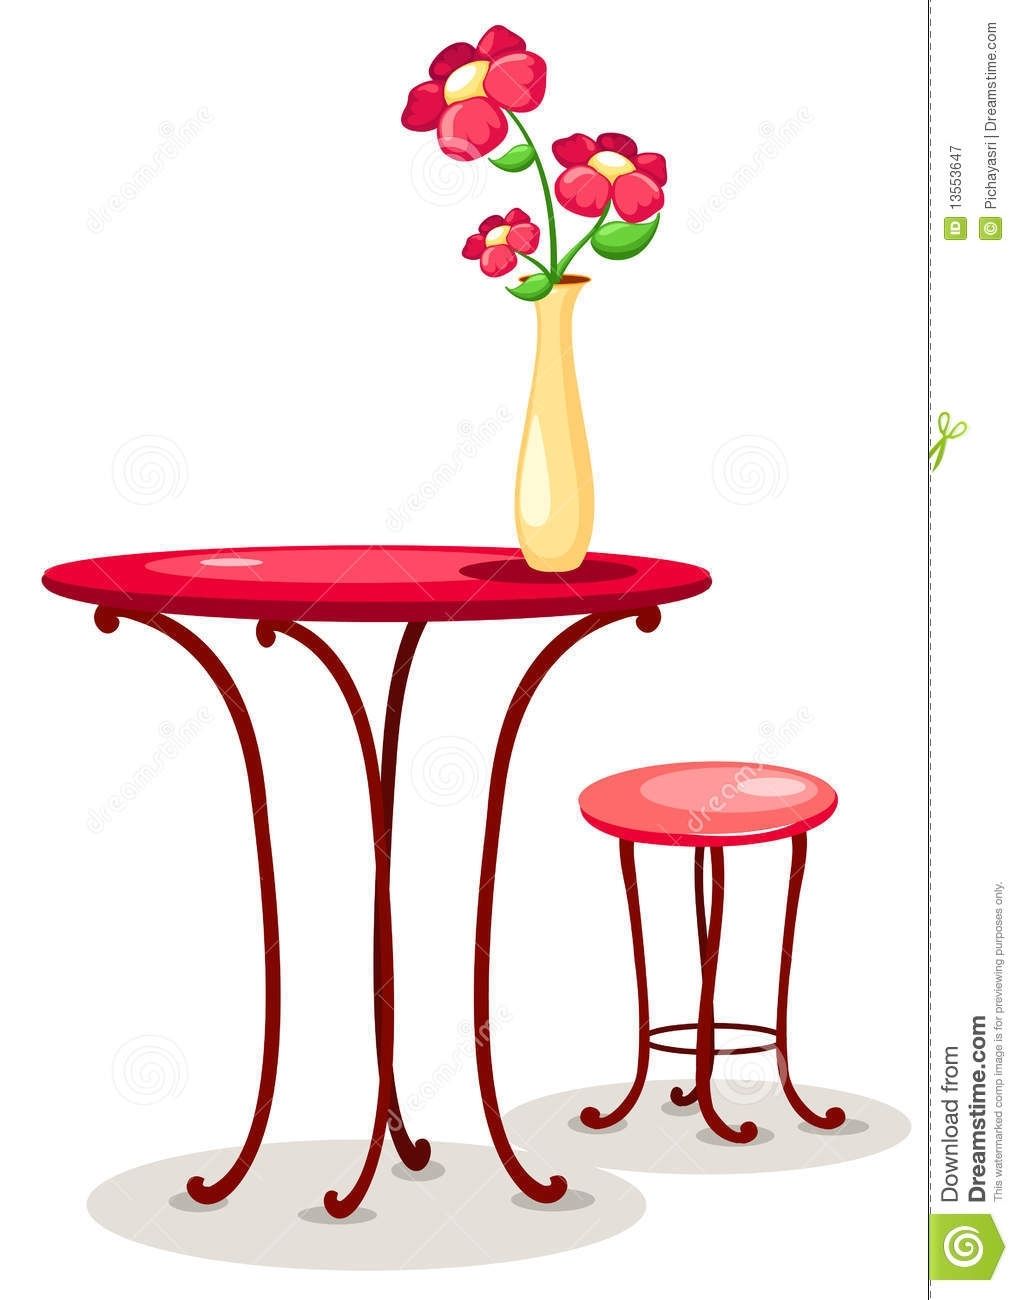 vase clipart table